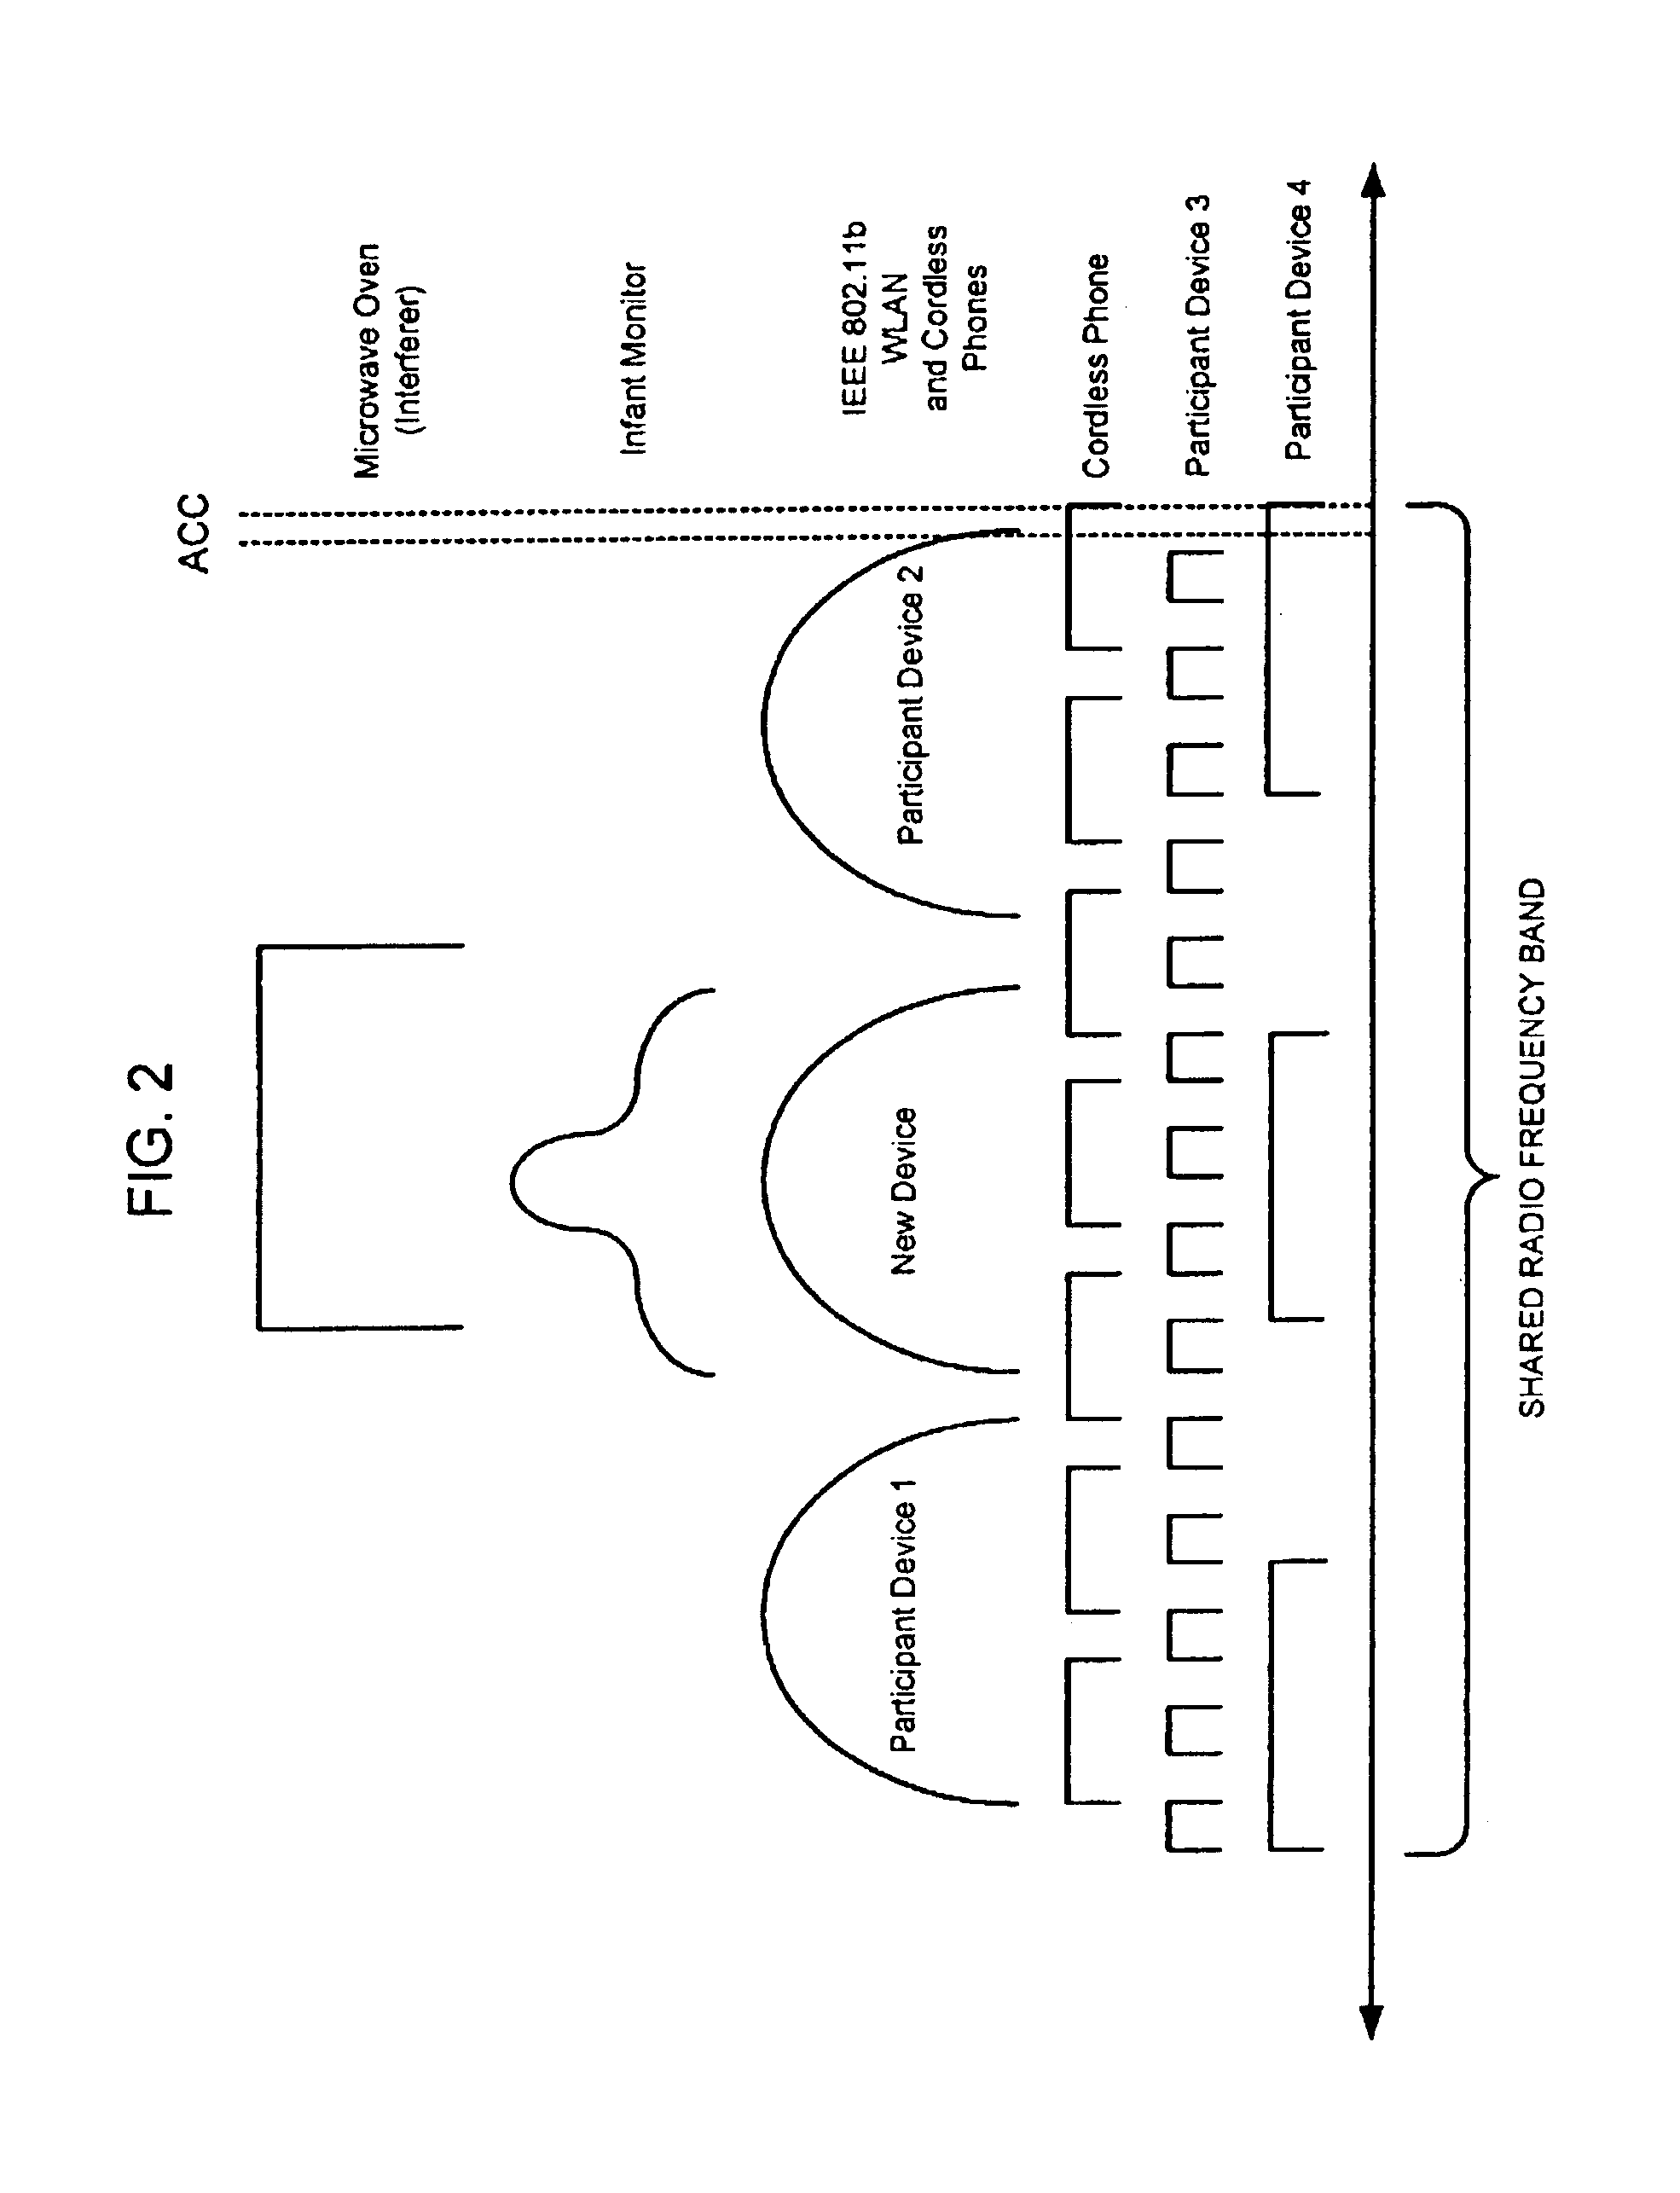 Ad-hoc control protocol governing use of an unlicensed or shared radio frequency band